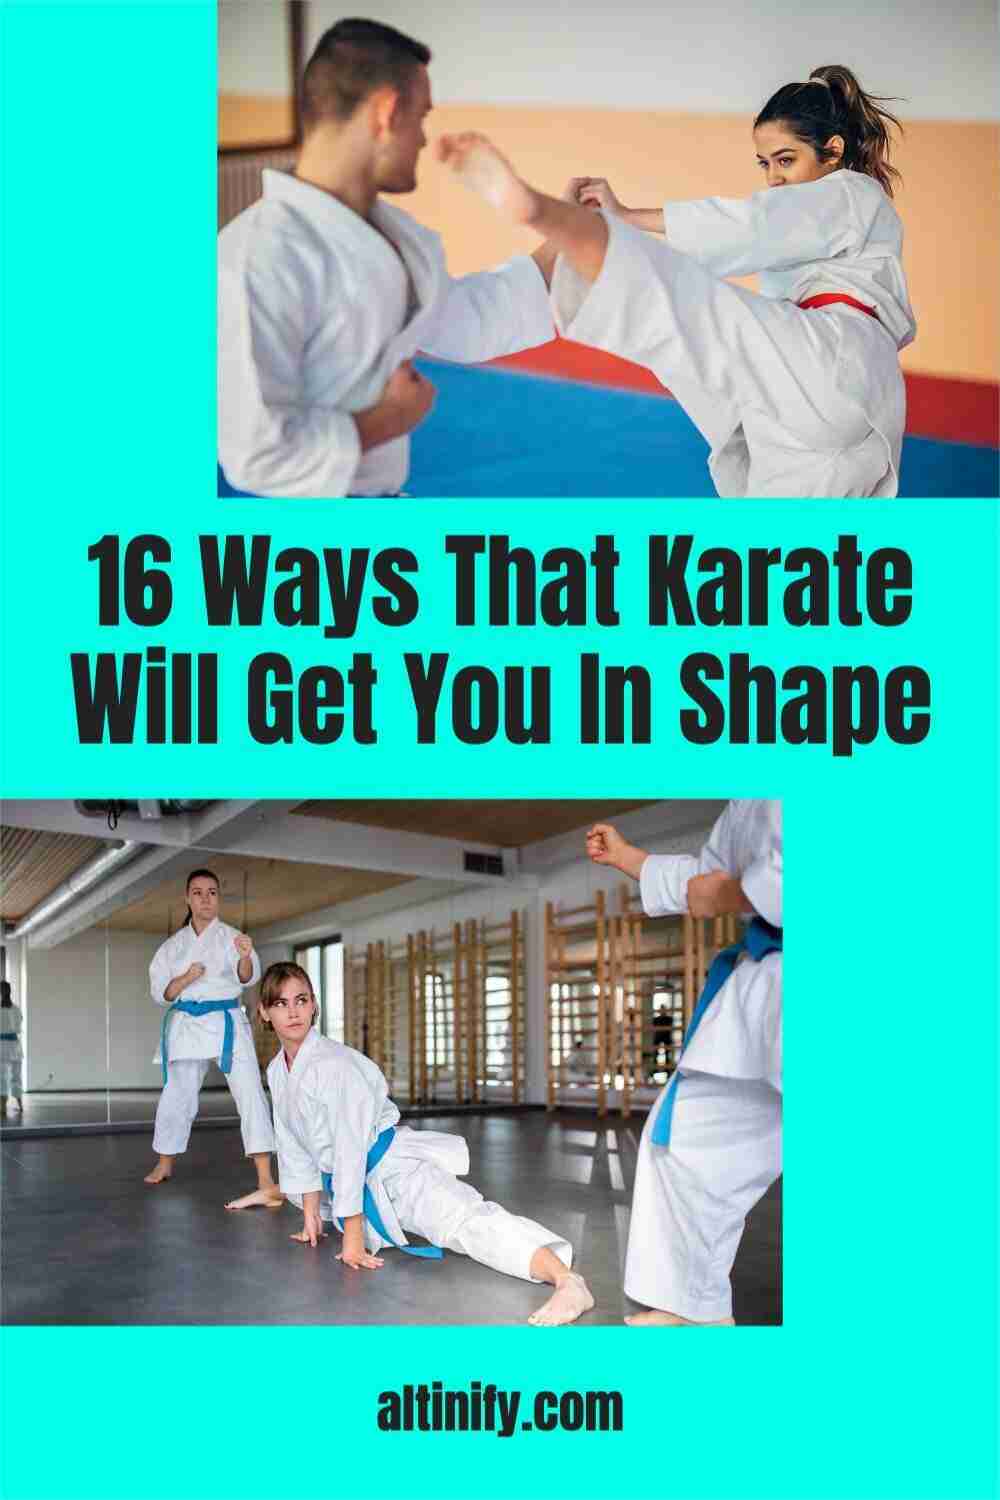 16 Ways That Karate Will Get You In Shape